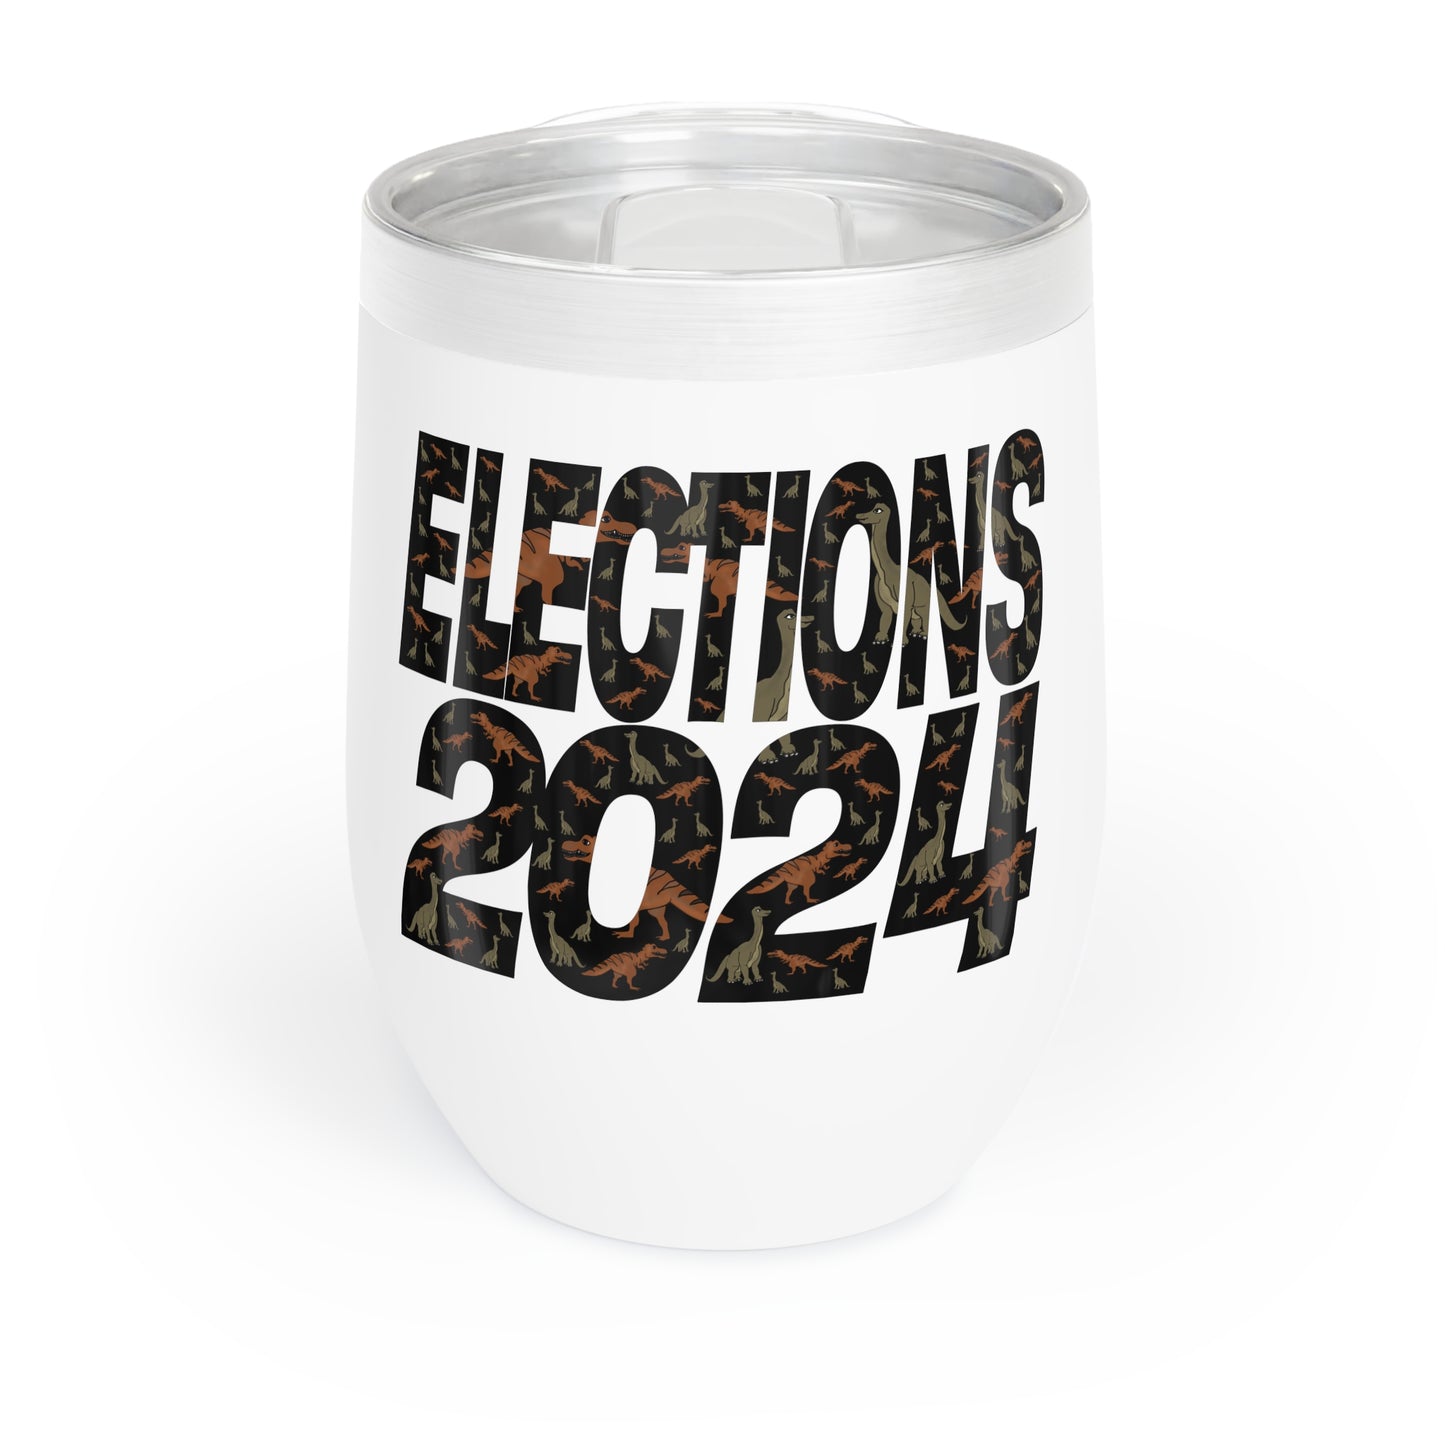 #elections2024 Chill Wine Tumbler